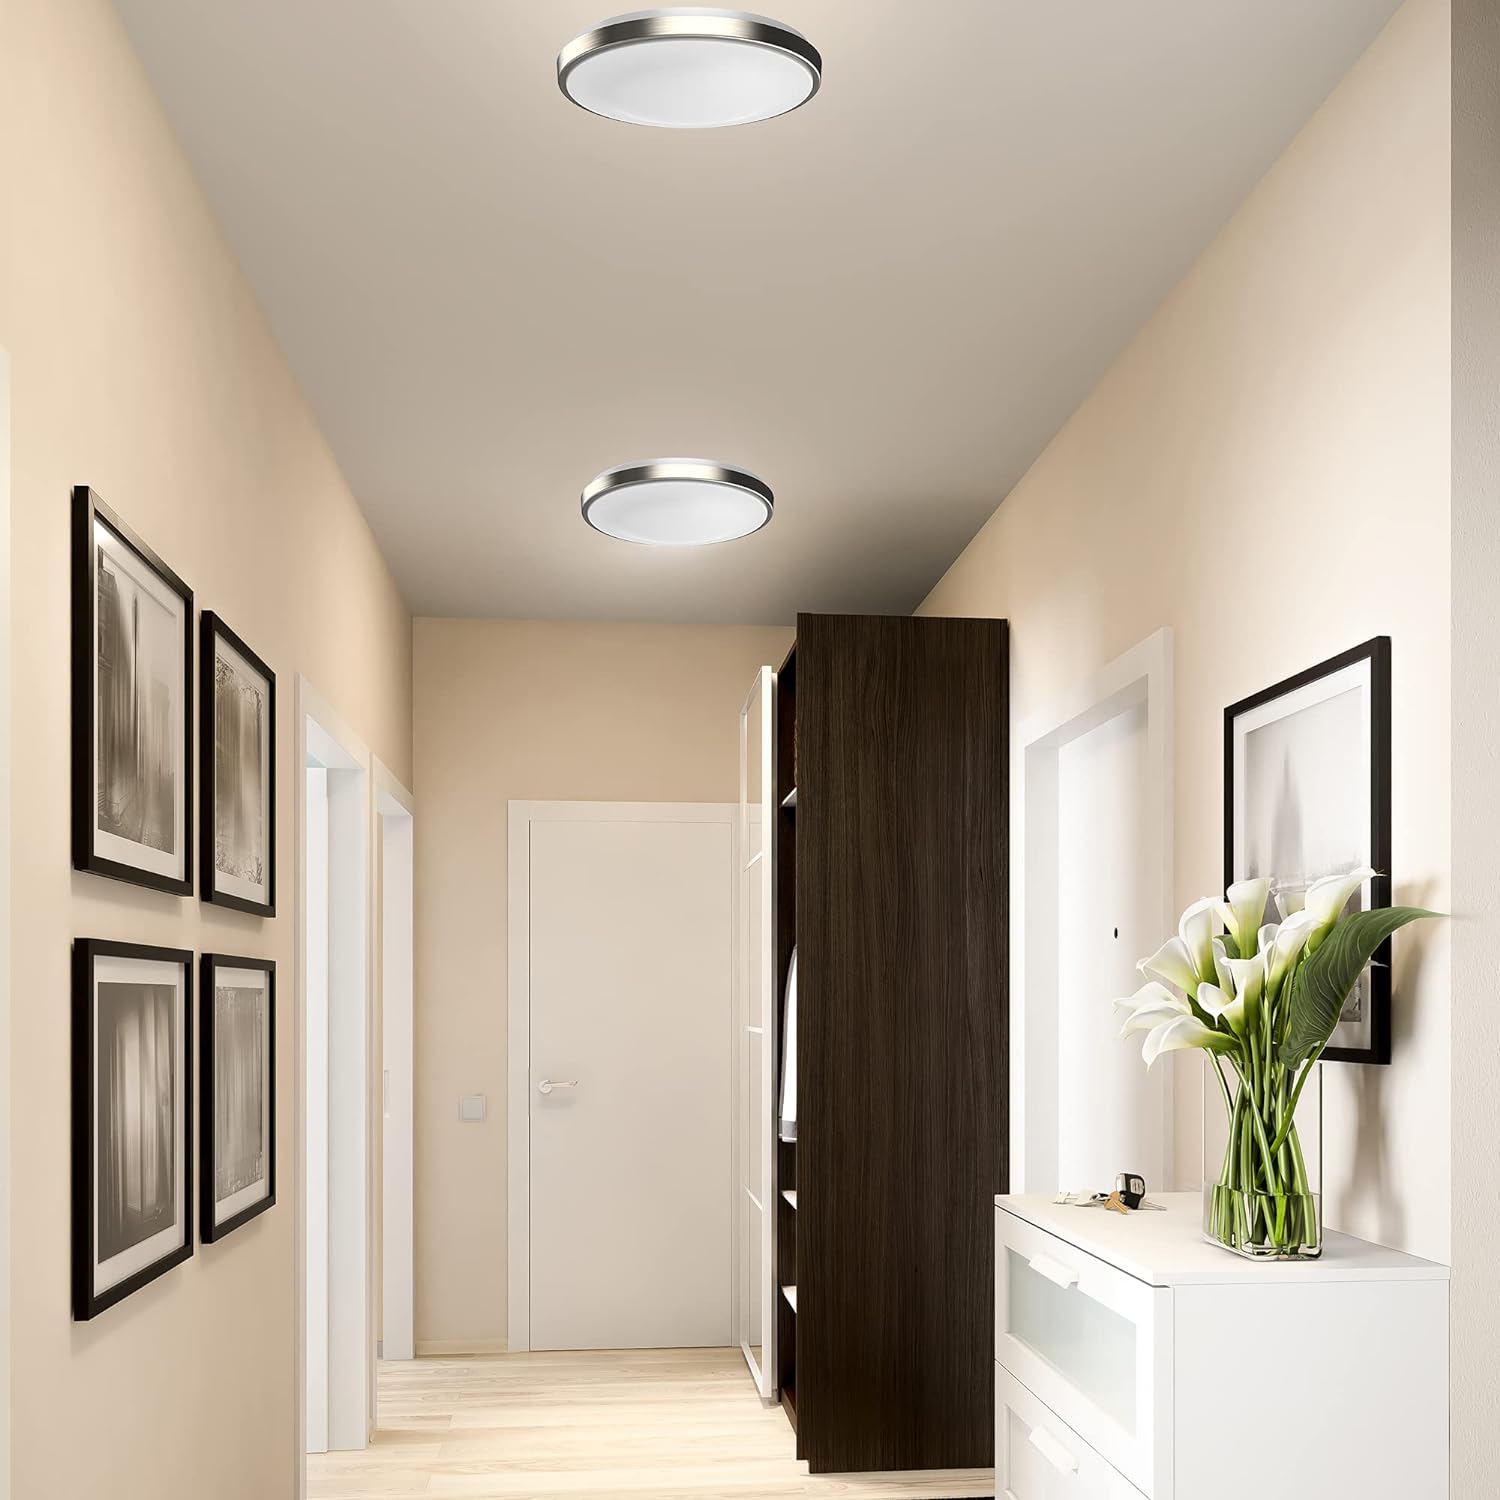 DYMOND 10 Inch LED Ceiling Light Flush Mount Brushed Nickel Dimmable Ring 3000K Warm White for Bedroom, Kitchen, Bathroom, Hallway, Stairwell